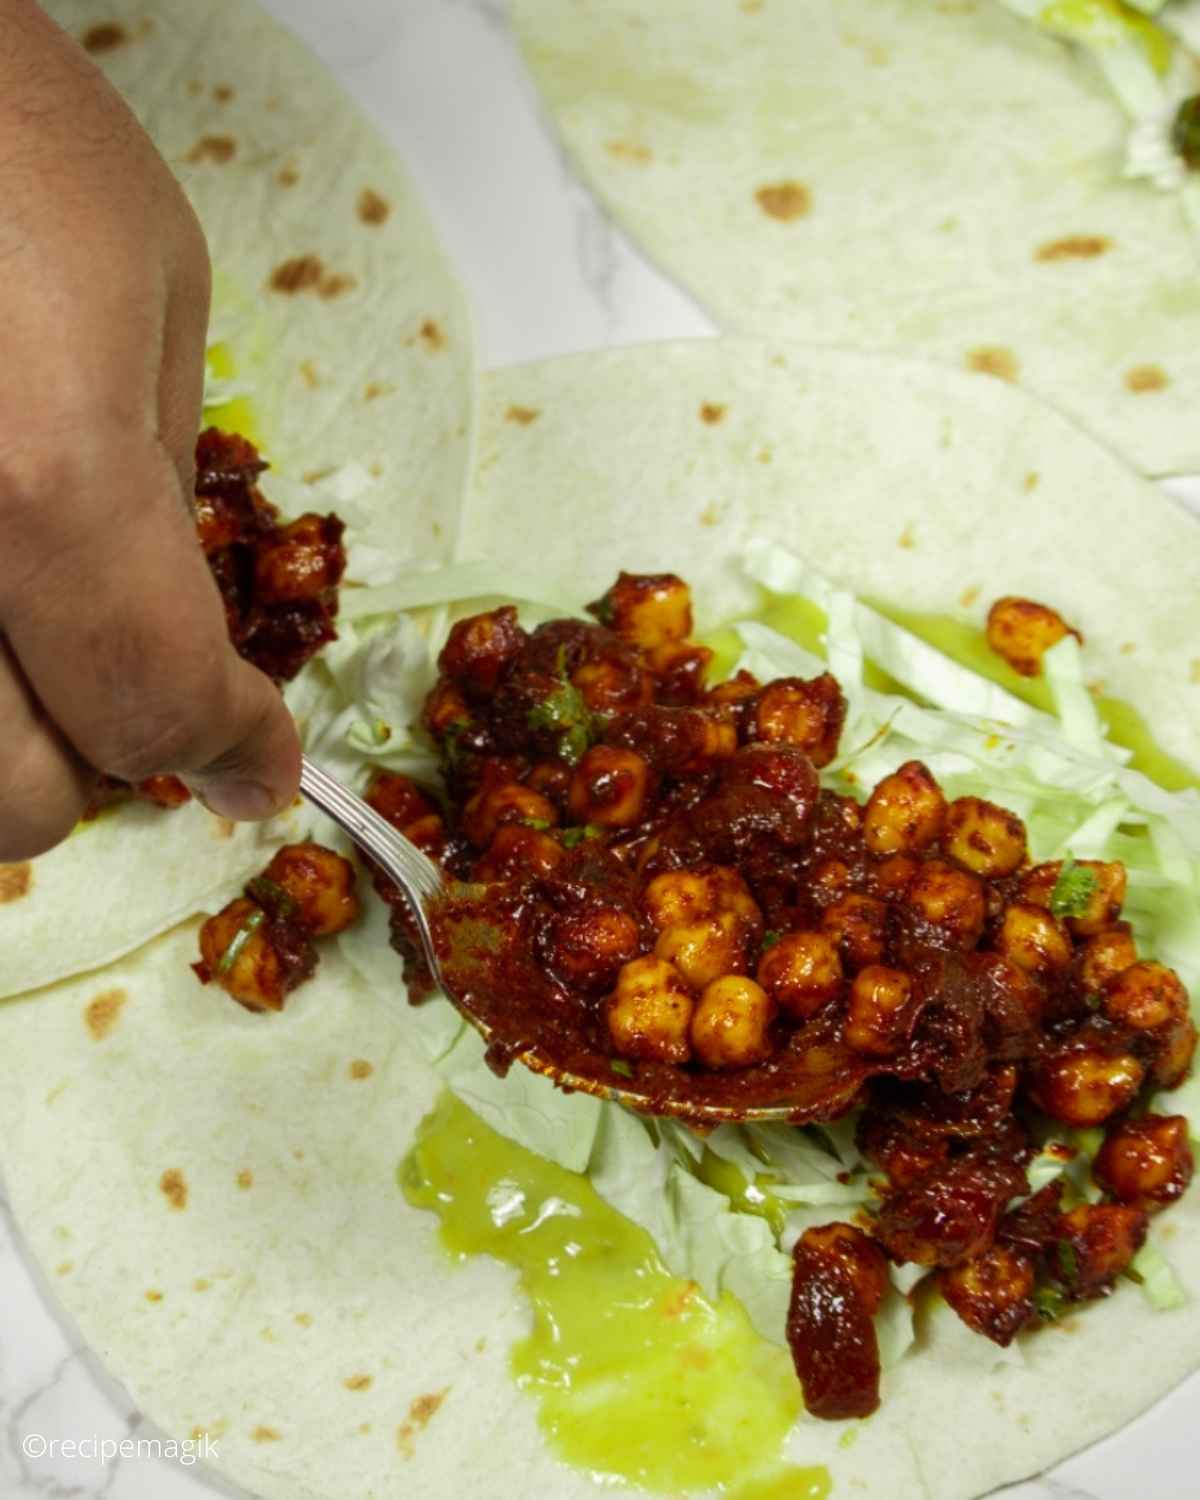 assembling chickpeas in tacos